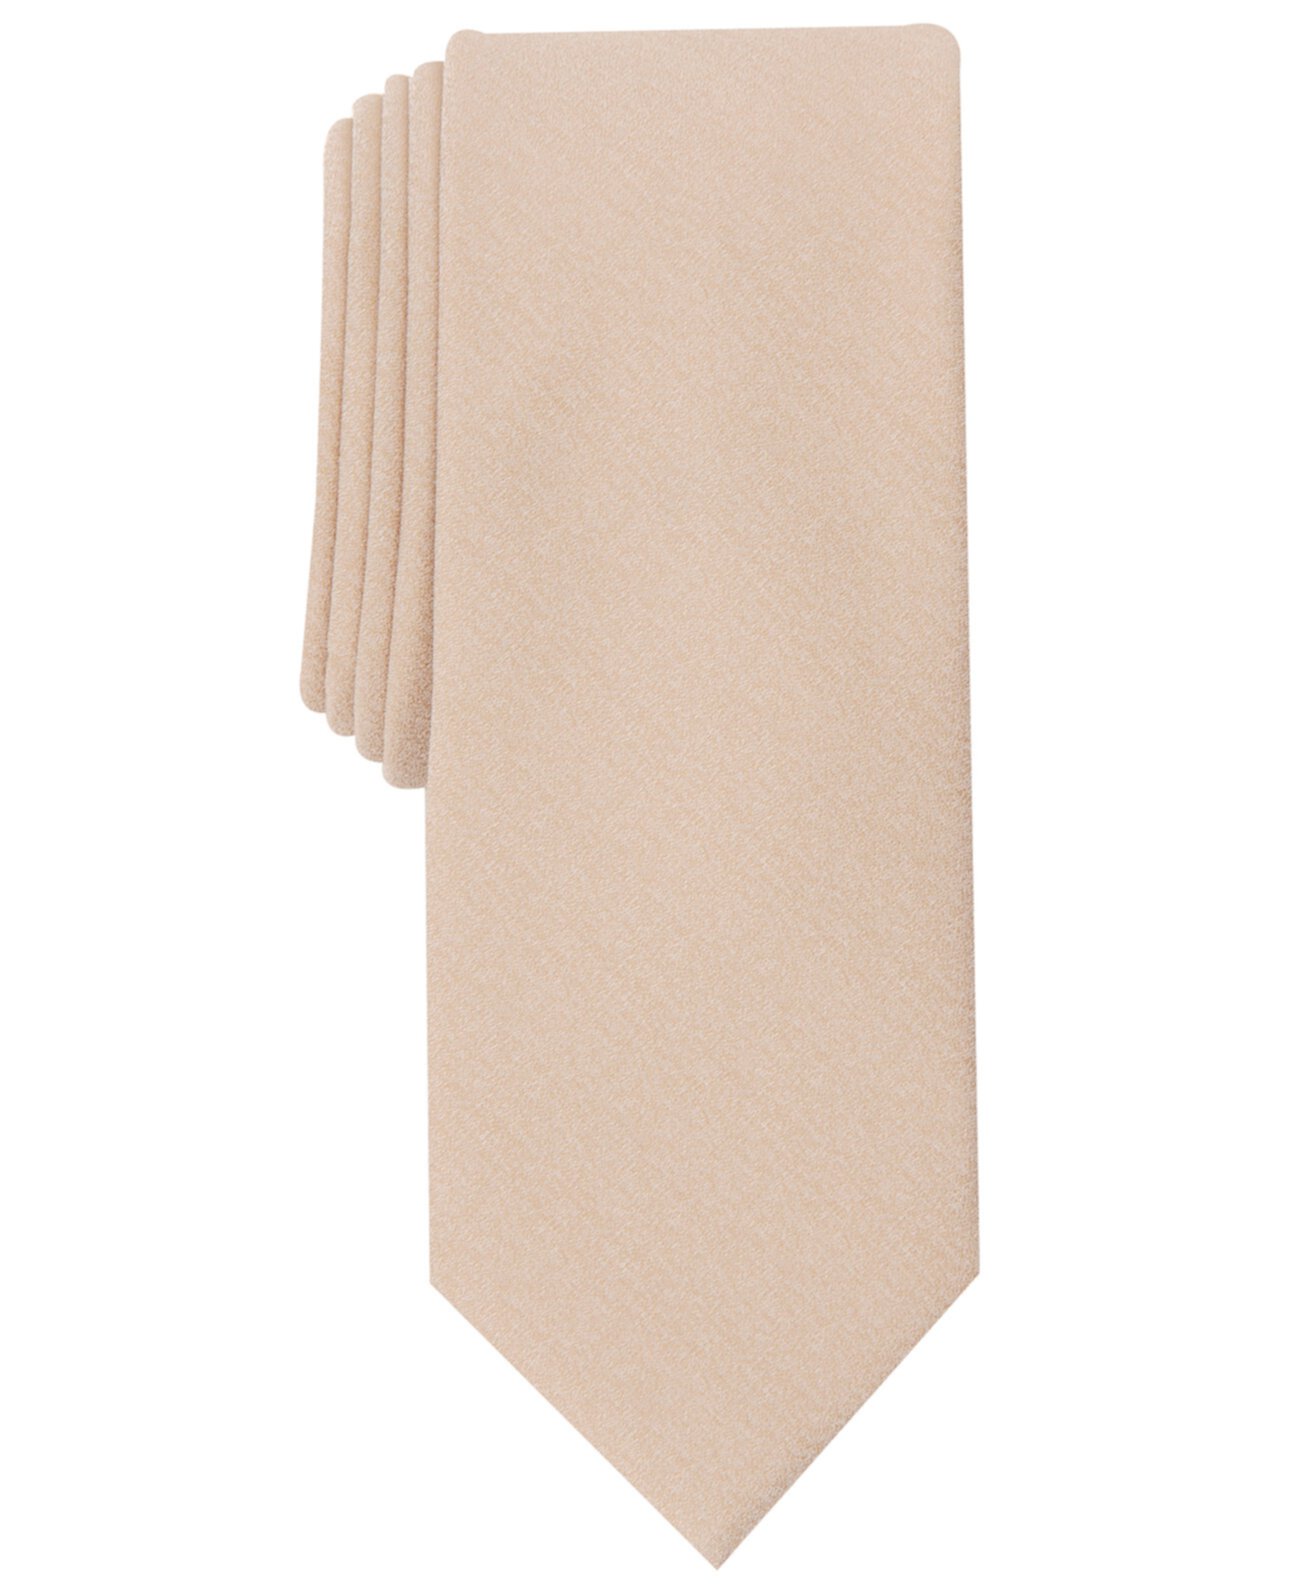 Sable Solid Tie, Created for Macy's Bar III